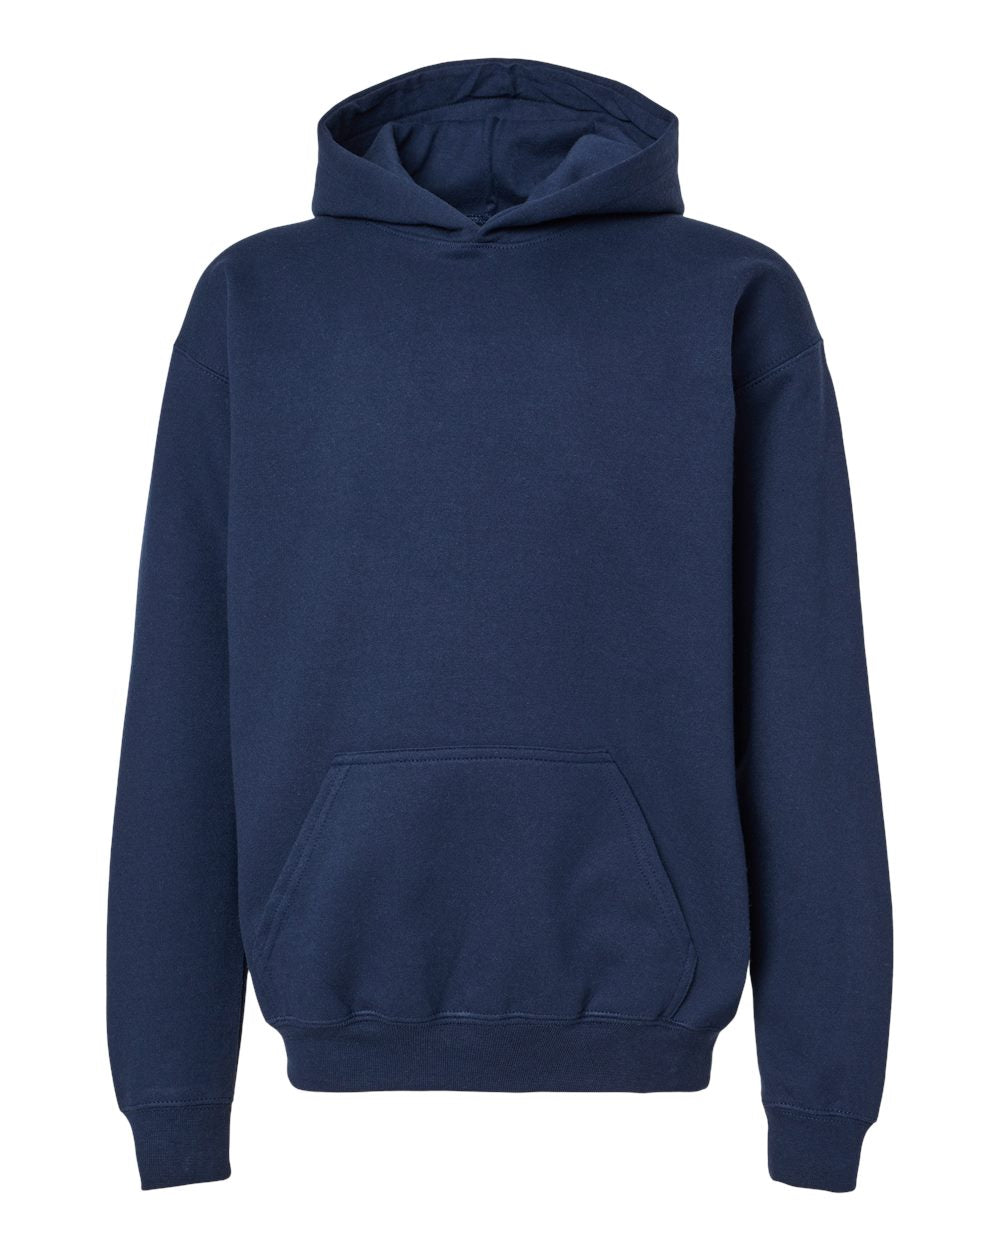 Gildan Softstyle® Youth Midweight Hooded Sweatshirt SF500B #color_Navy